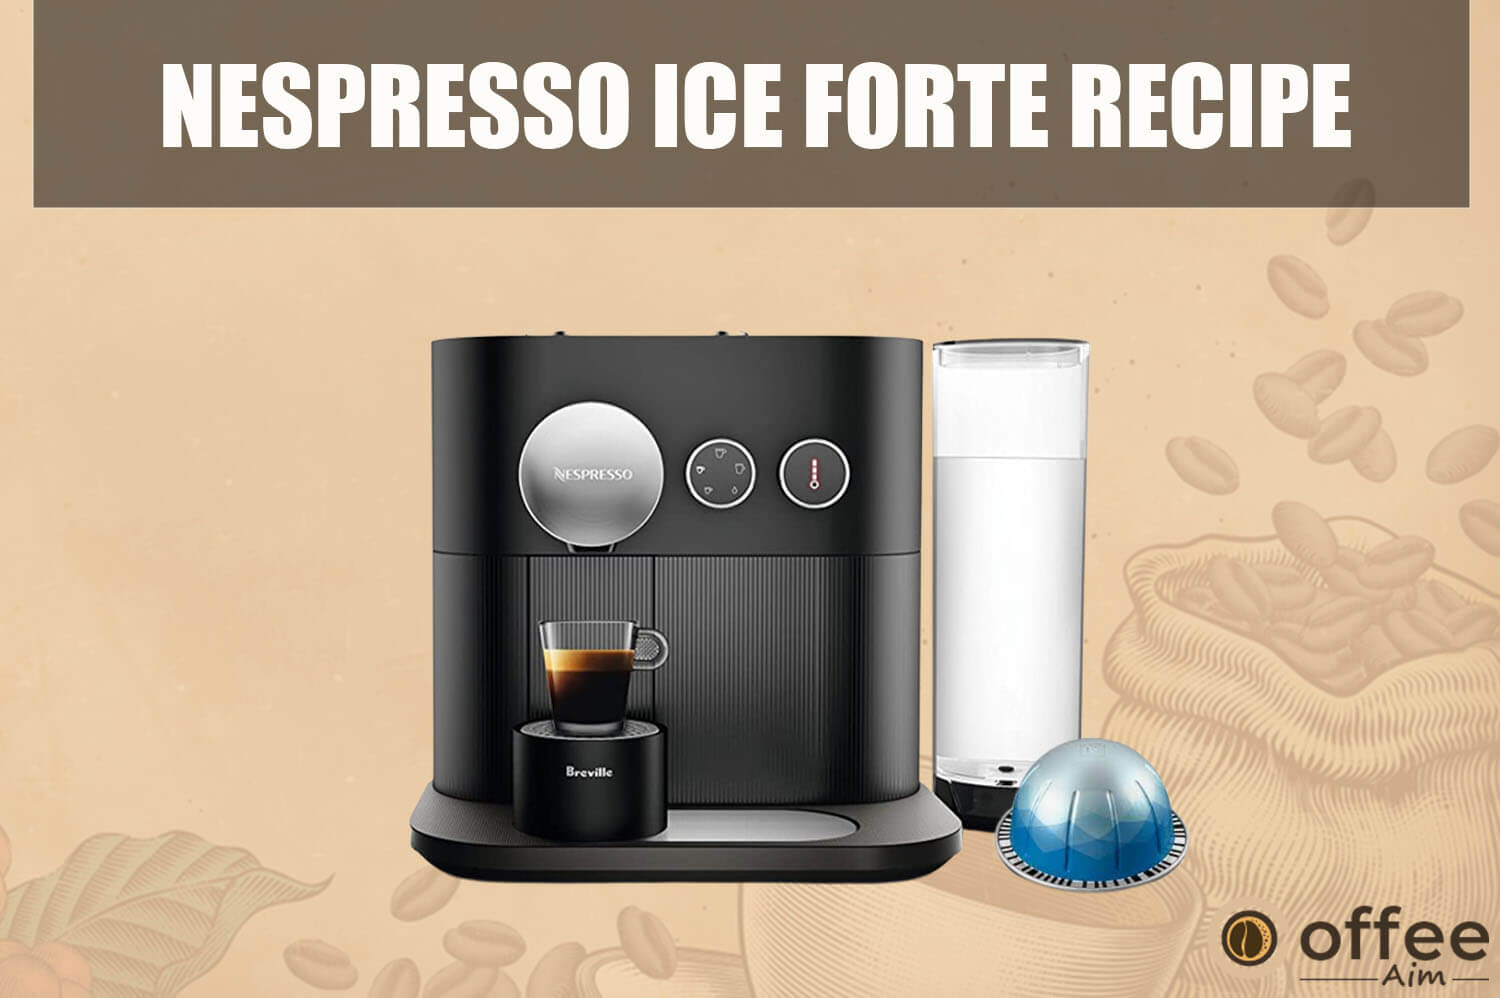 Featured image for the article "Nespresso Ice Forte Recipe"